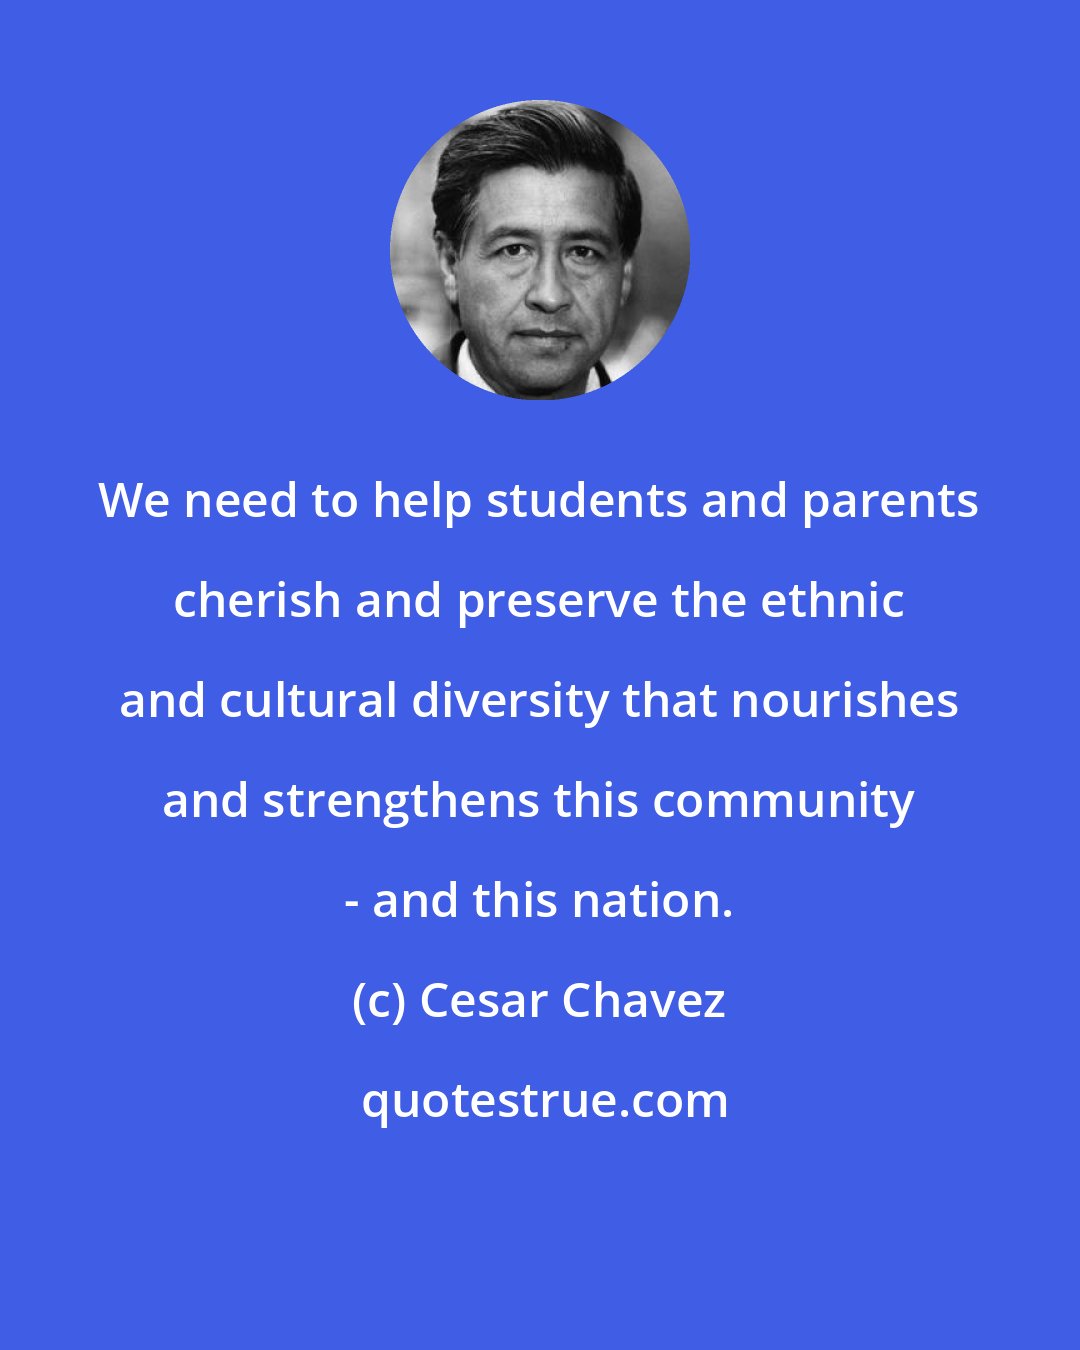 Cesar Chavez: We need to help students and parents cherish and preserve the ethnic and cultural diversity that nourishes and strengthens this community - and this nation.